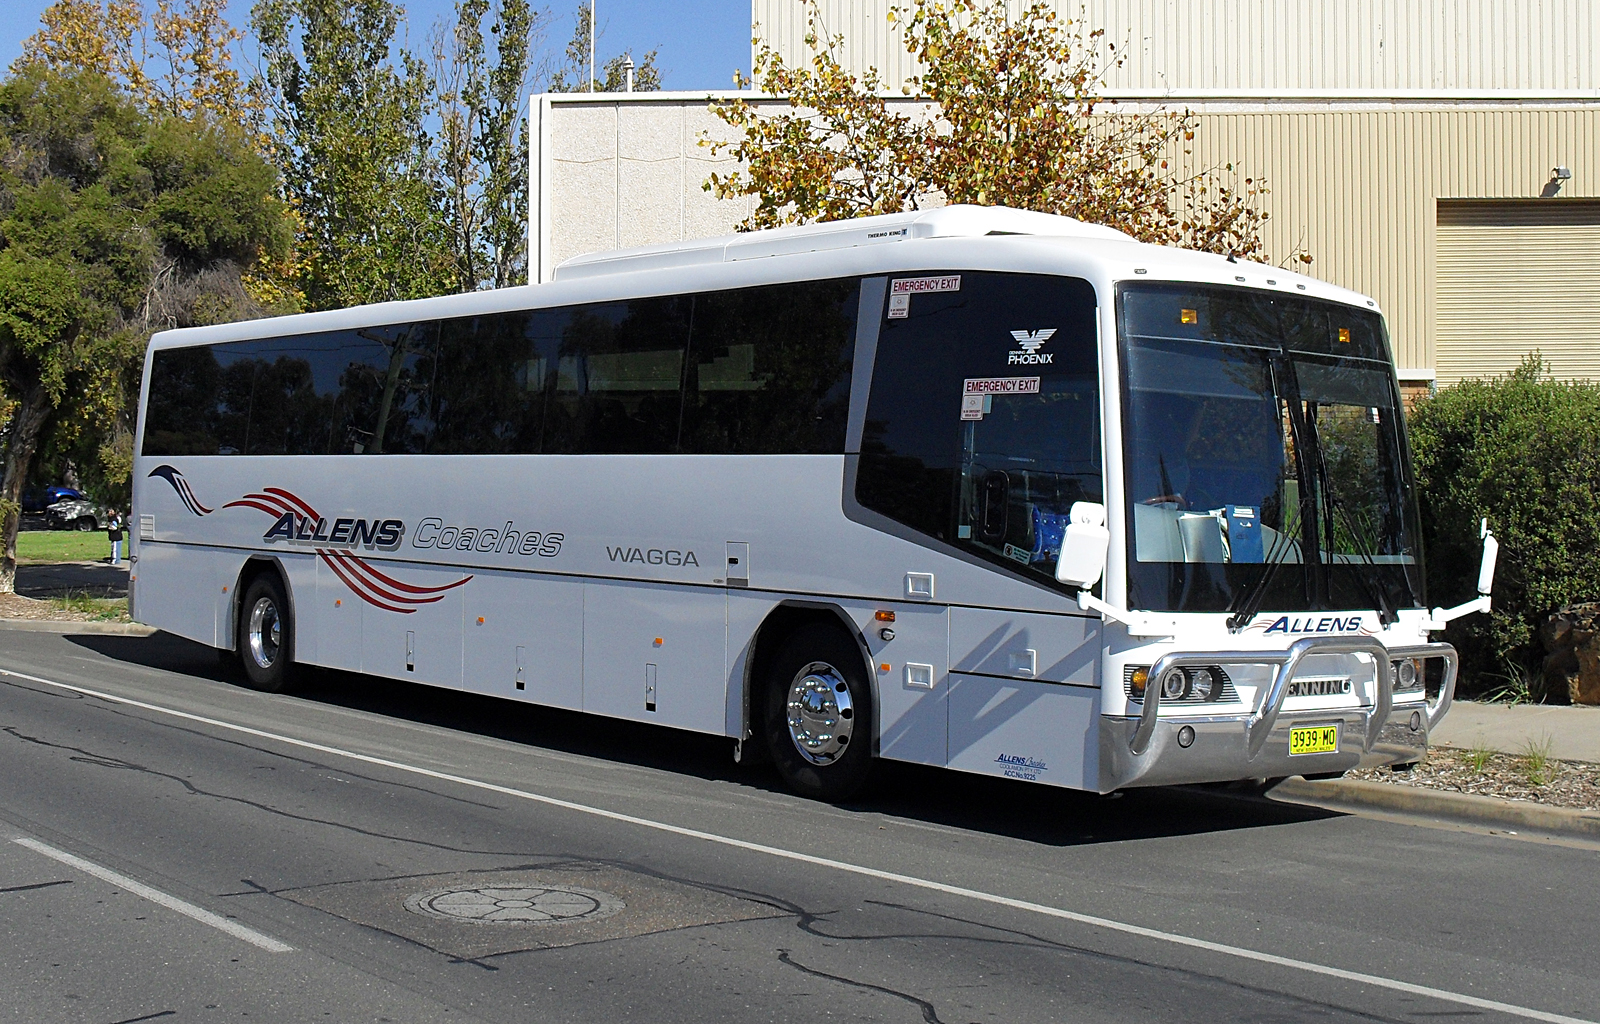 A Denning Manufacturing Silver Phoenix in
Wagga Wagga, New South Wales in May 2009